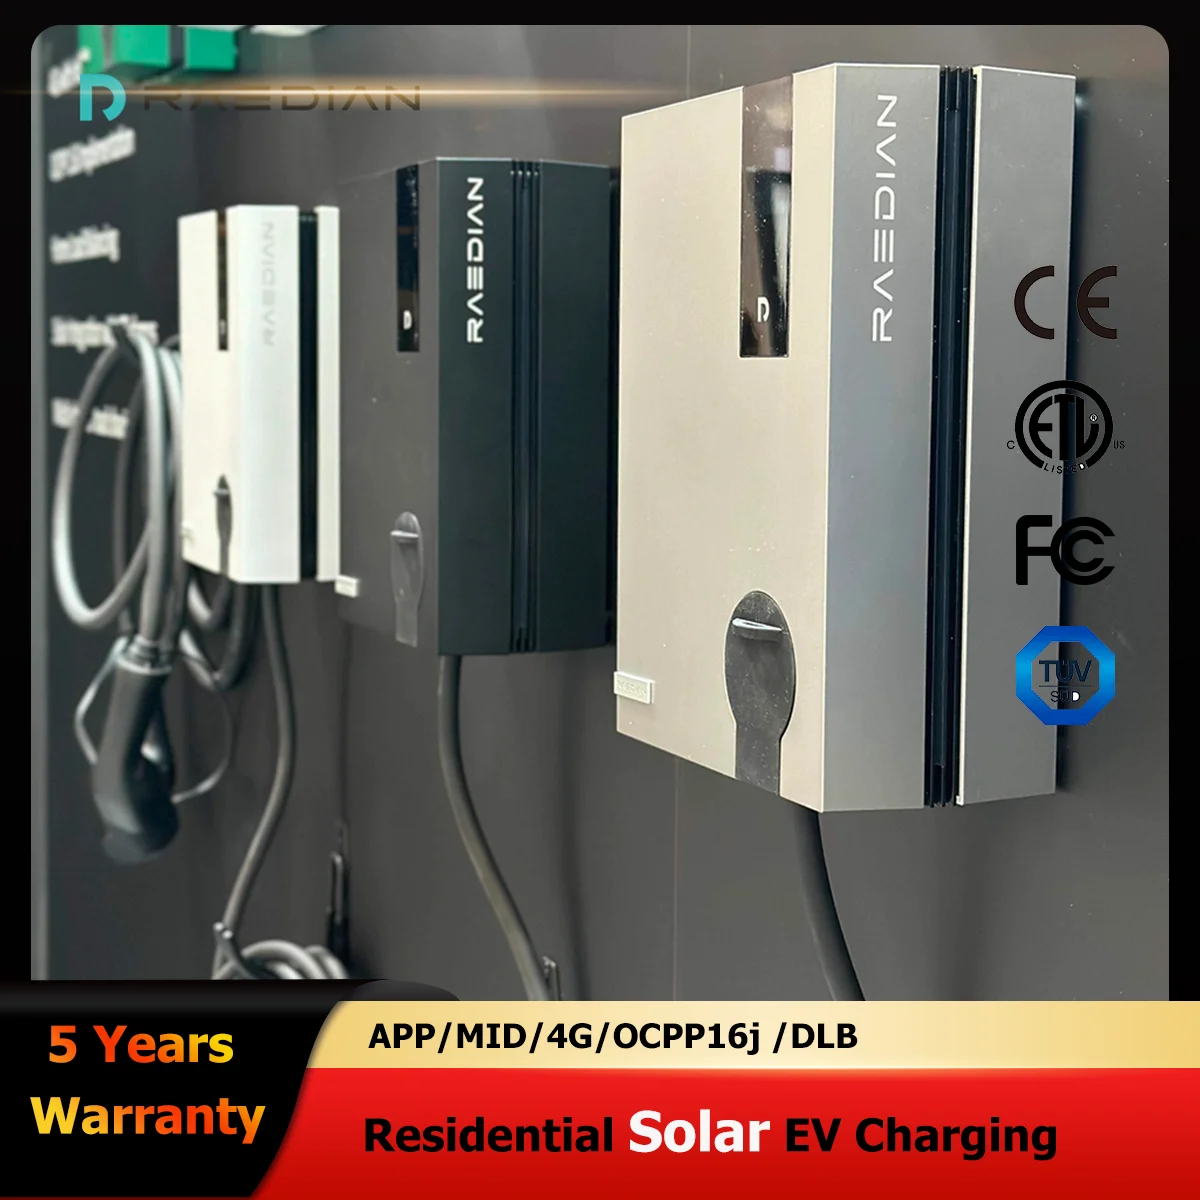 

Raedian 7kW 11kW 22kW EV Chargers OCPP 1.6J Wallbox AC Chargers Type 2 Home Balance Solar EV Charging With DLB